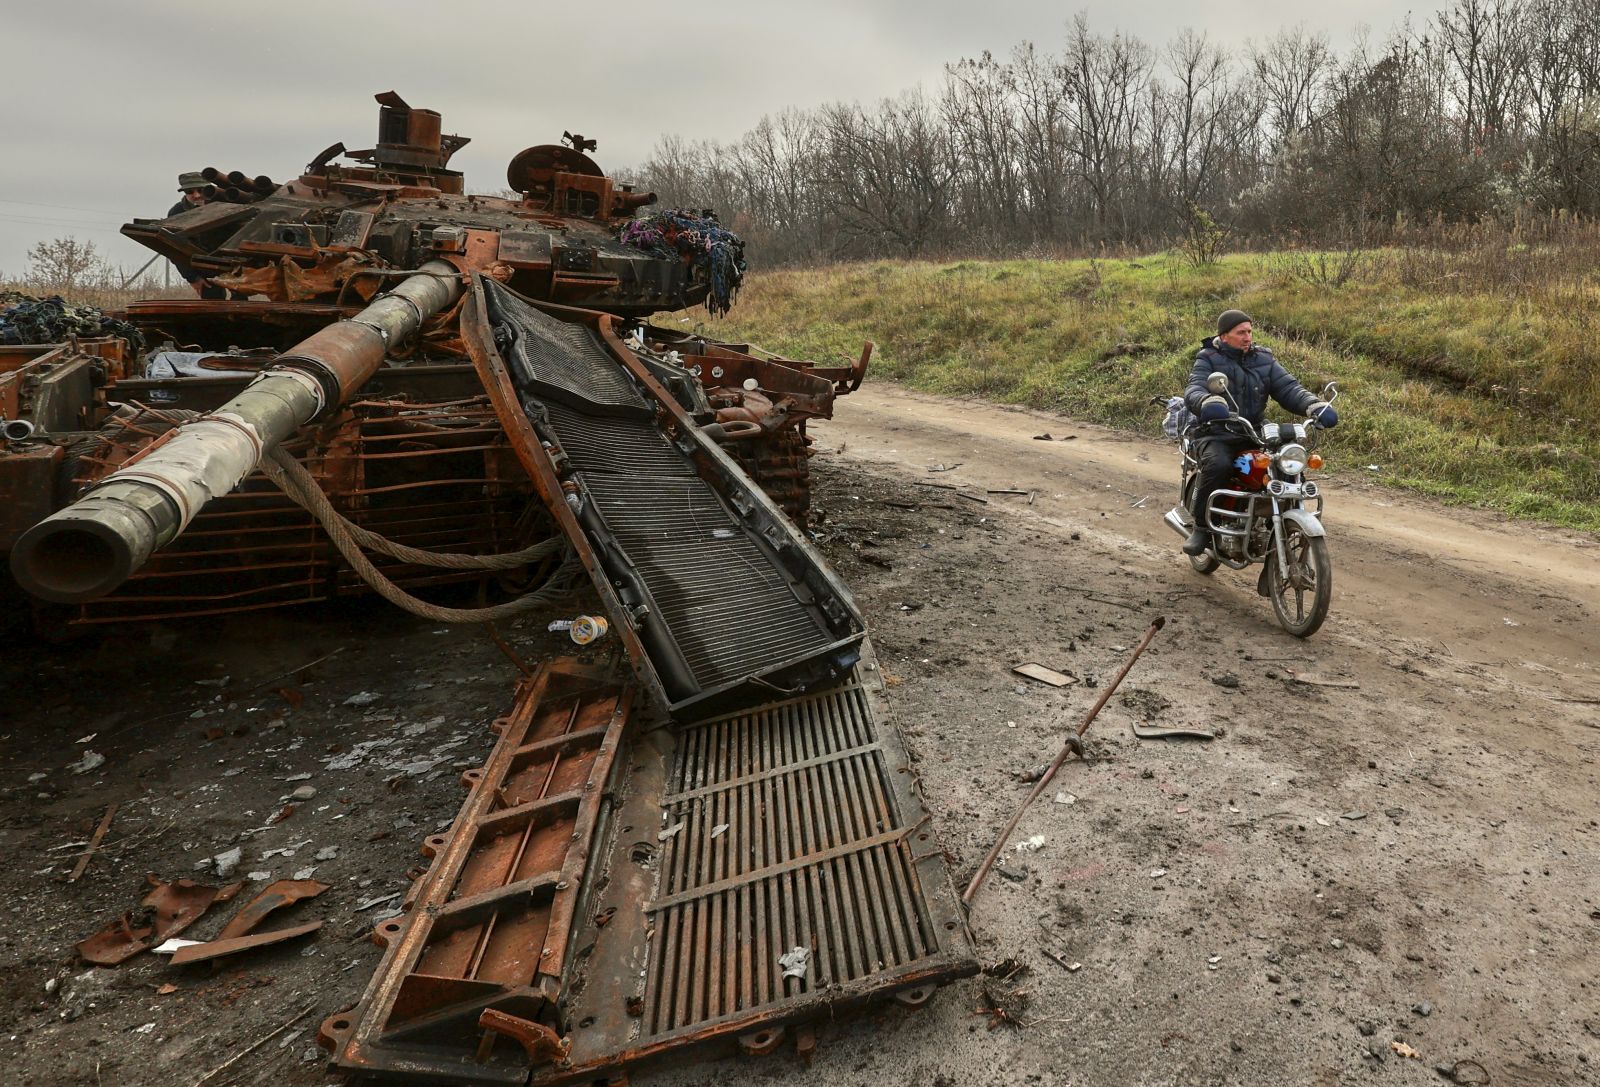 epa10296694 A local man rides a motor bike past a destroyed tank in the Kharkiv region, Ukraine, 09 November 2022. A counter-offensive by Ukrainian forces led to the withdrawal of Russian troops who occupied territory in the northeast of the country. Kharkiv and surrounding areas have been the target of heavy shelling since February 2022, when Russian troops entered Ukraine starting a conflict that has provoked destruction and a humanitarian crisis.  EPA/SERGEY KOZLOV